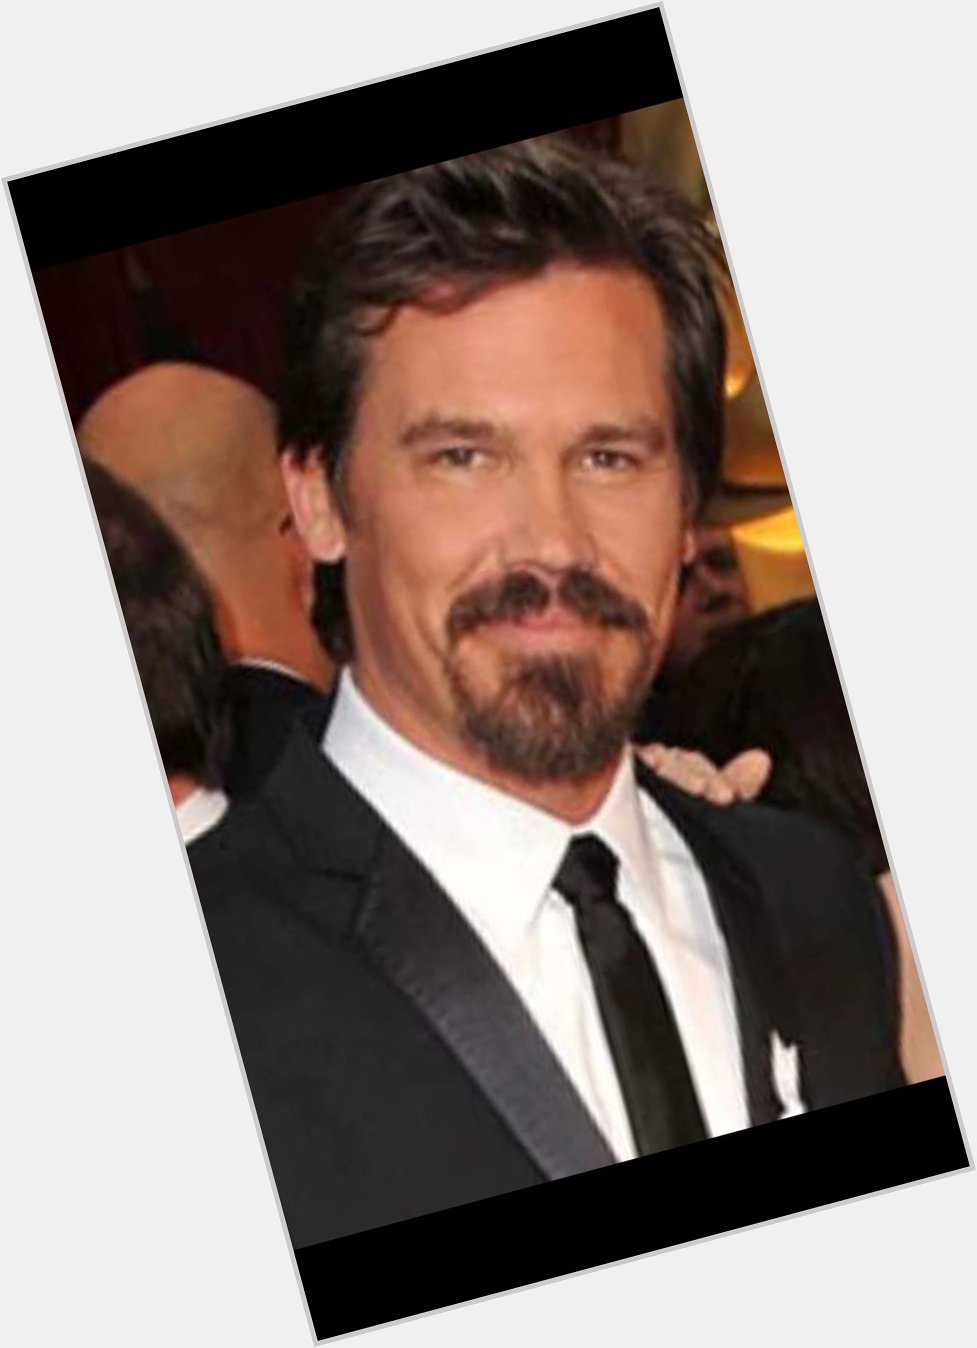 Happiest of happy birthday s to my King!! You re beyond amazing!! Hope you have a wonderful day Josh Brolin!! 